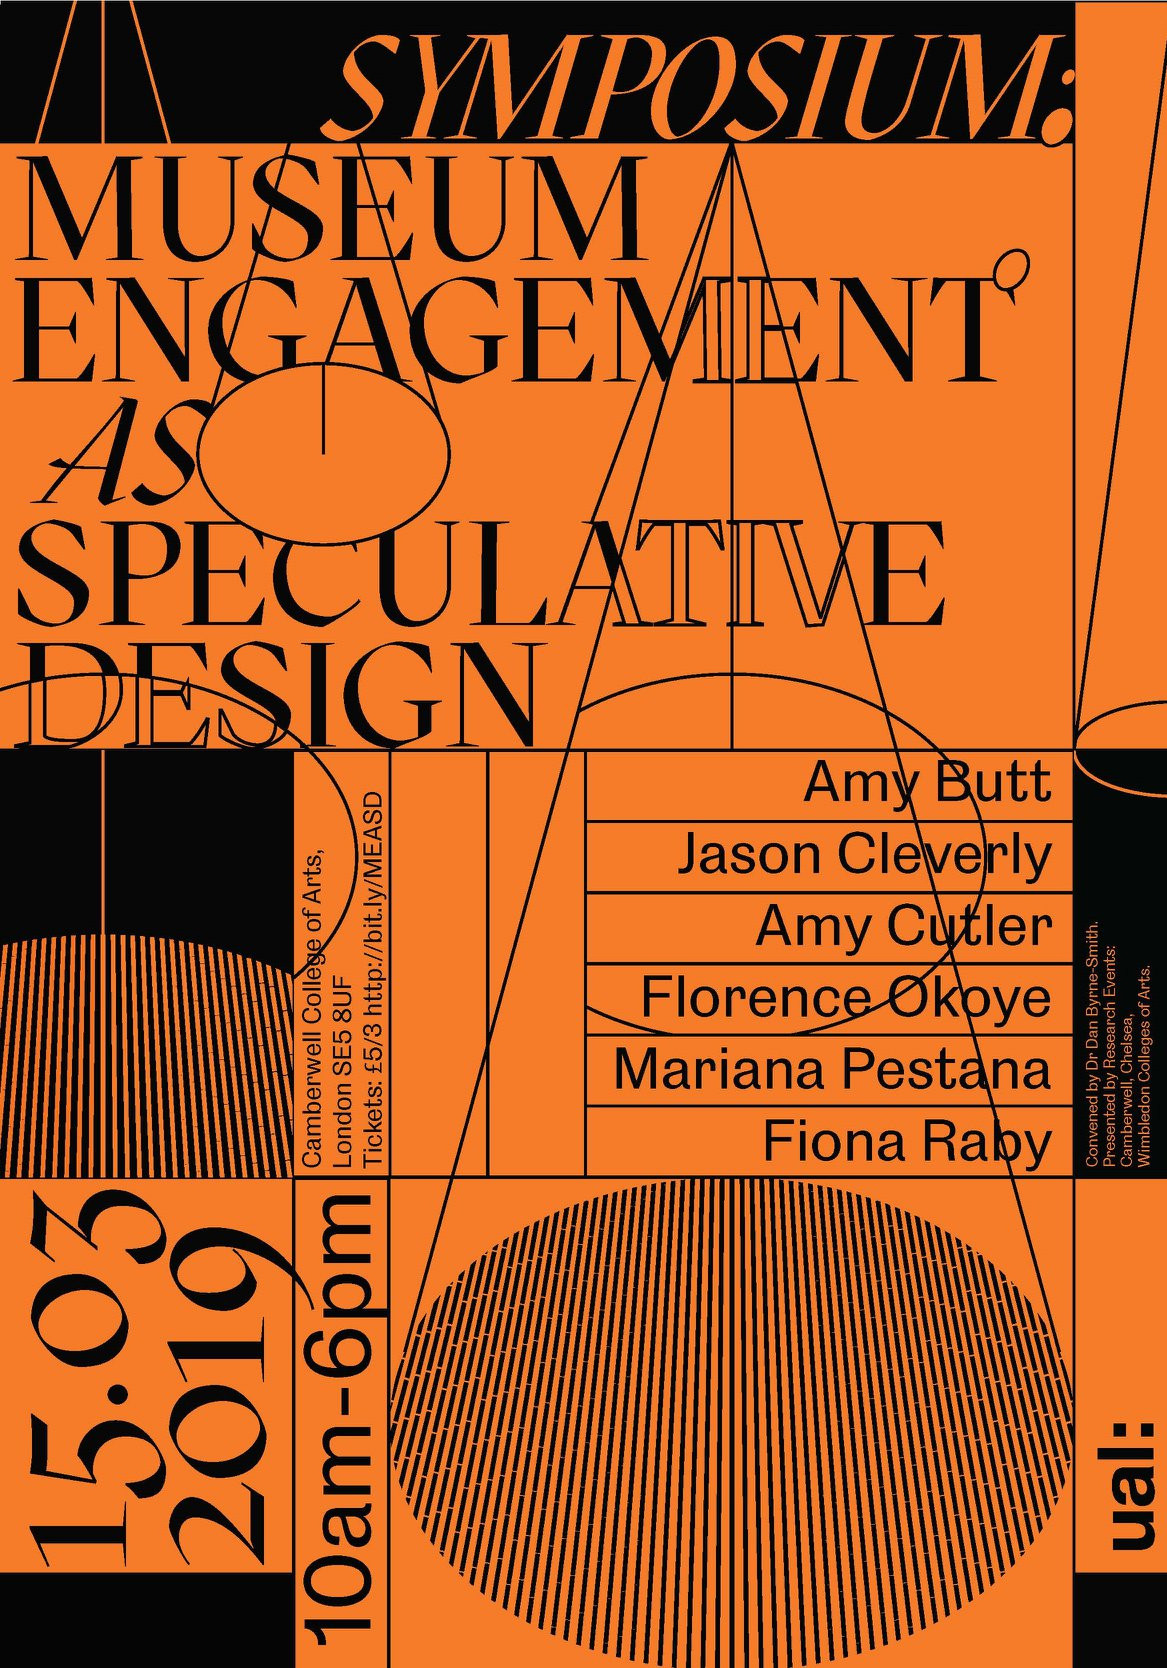 fig.5: Symposium poster designed by Petra Péterffy